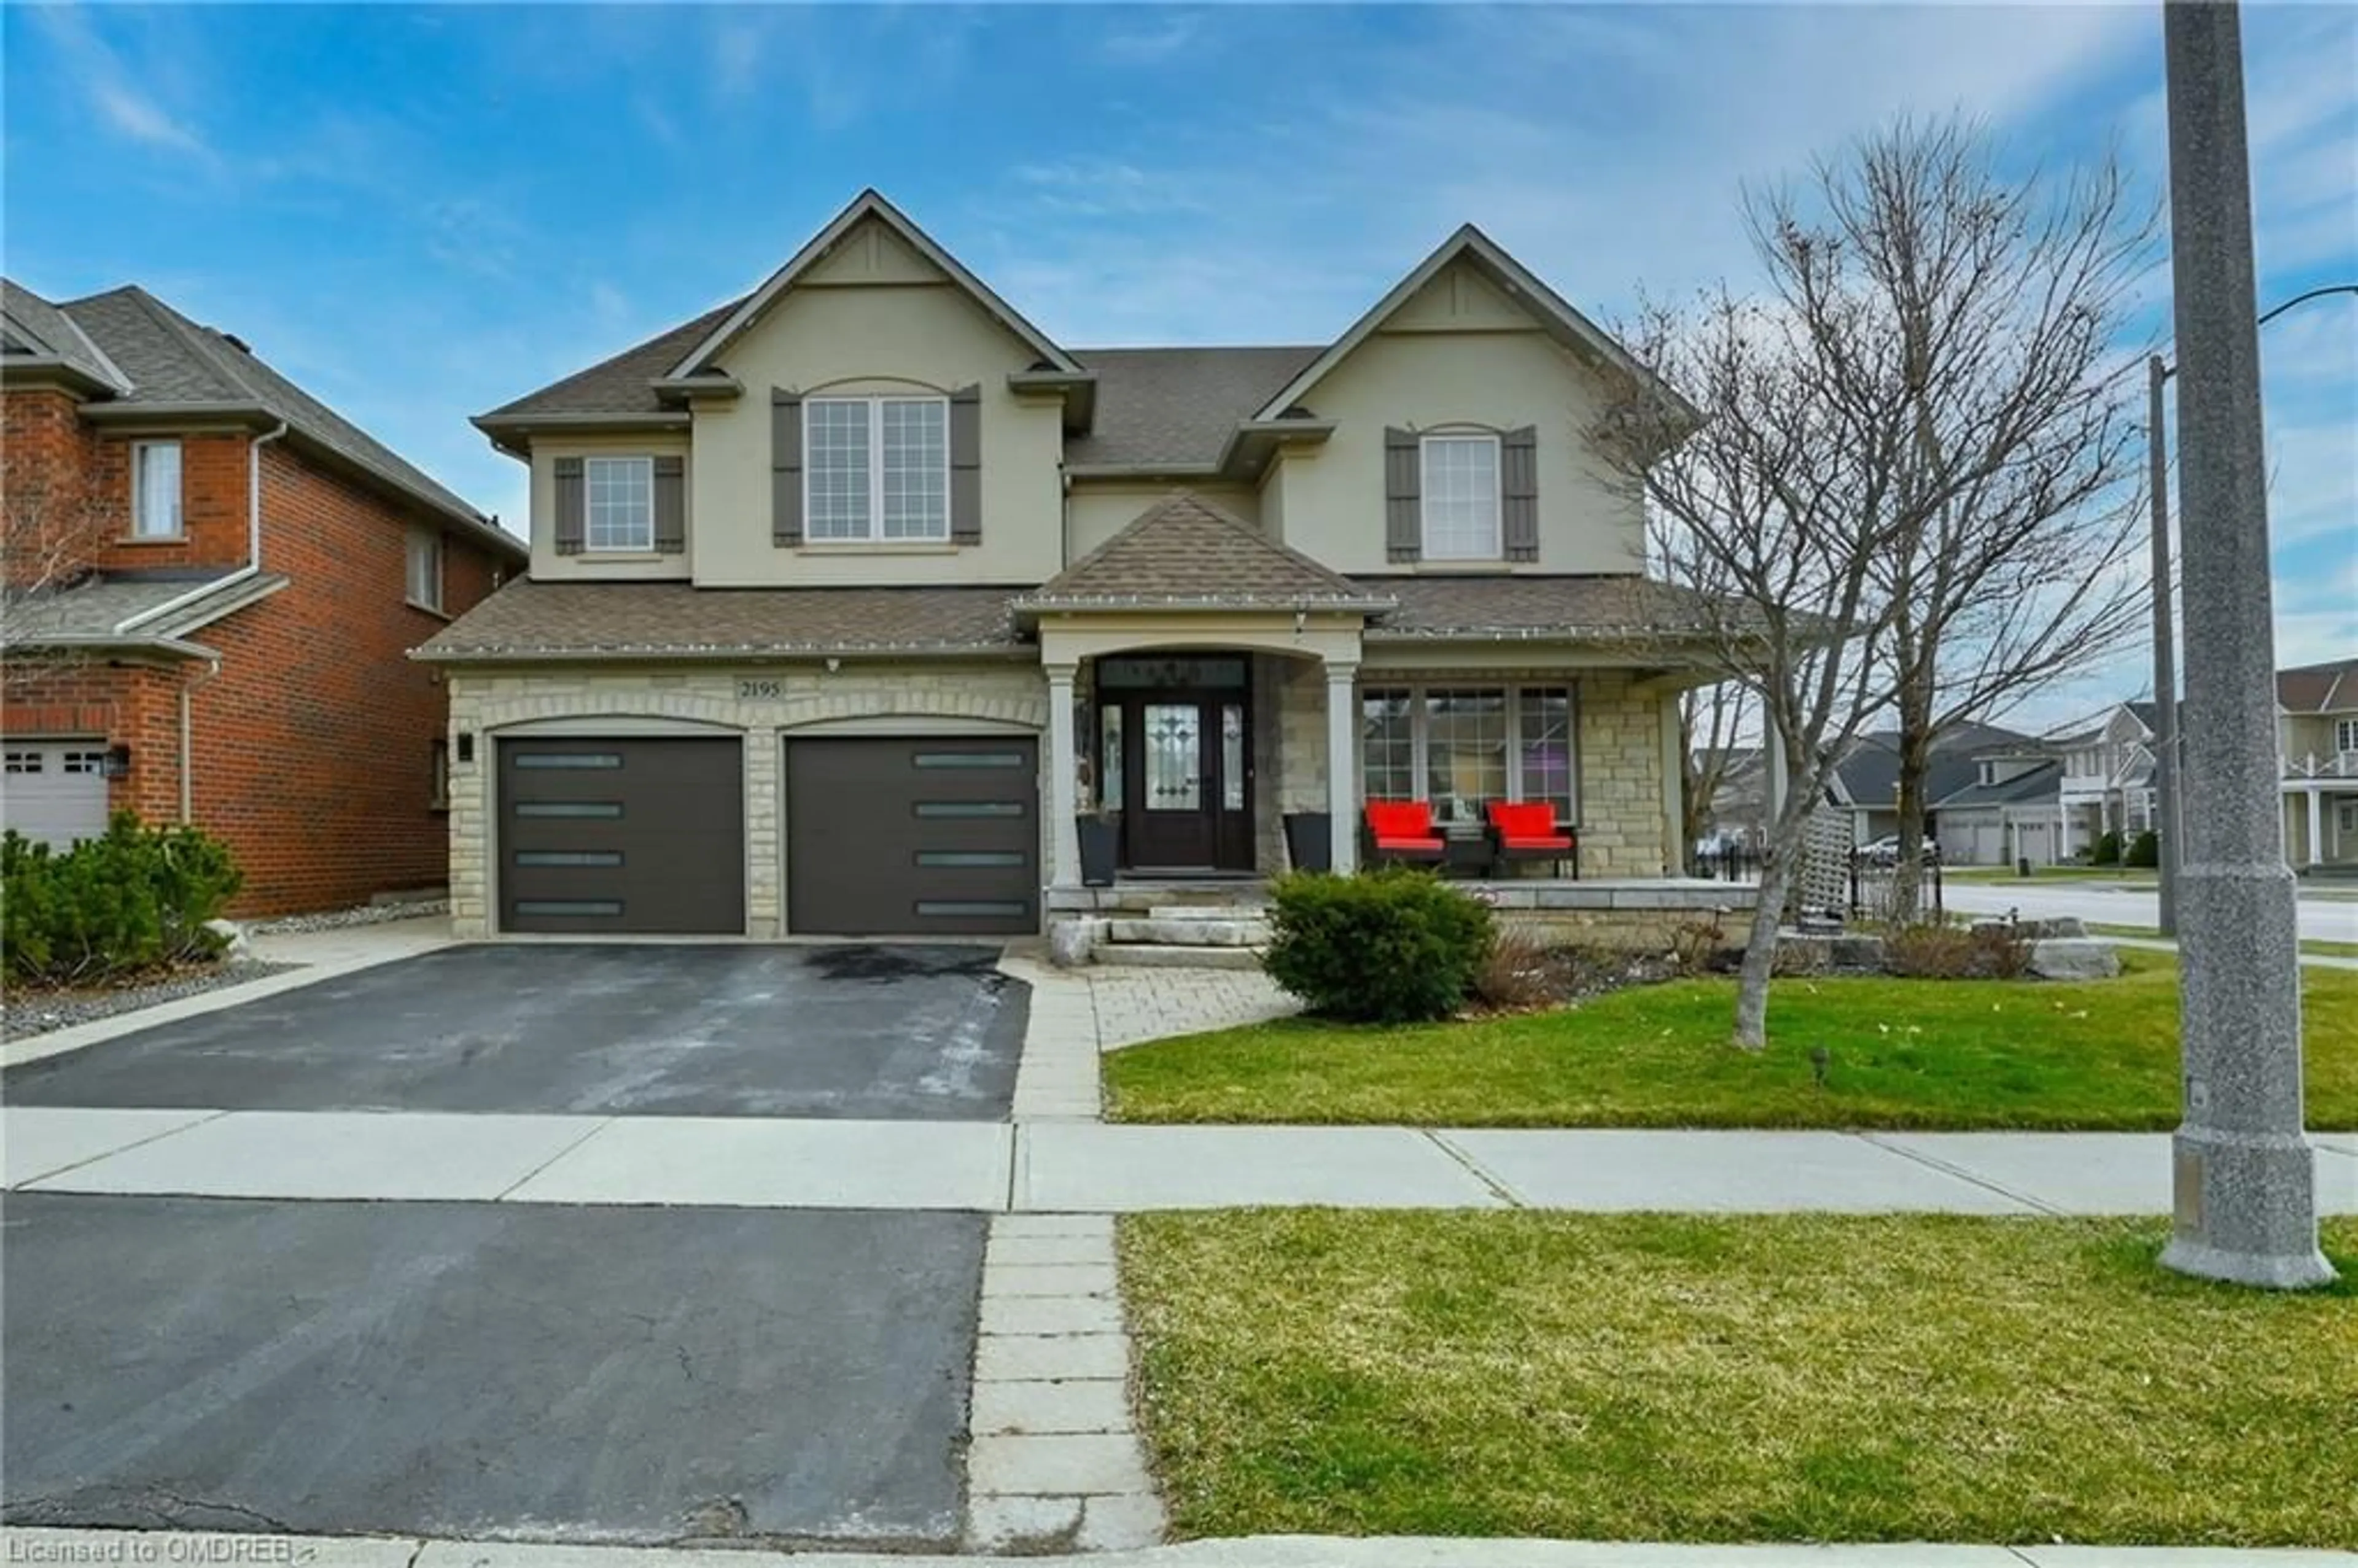 Home with brick exterior material for 2195 Dewsbury Dr, Oakville Ontario L6M 0B7